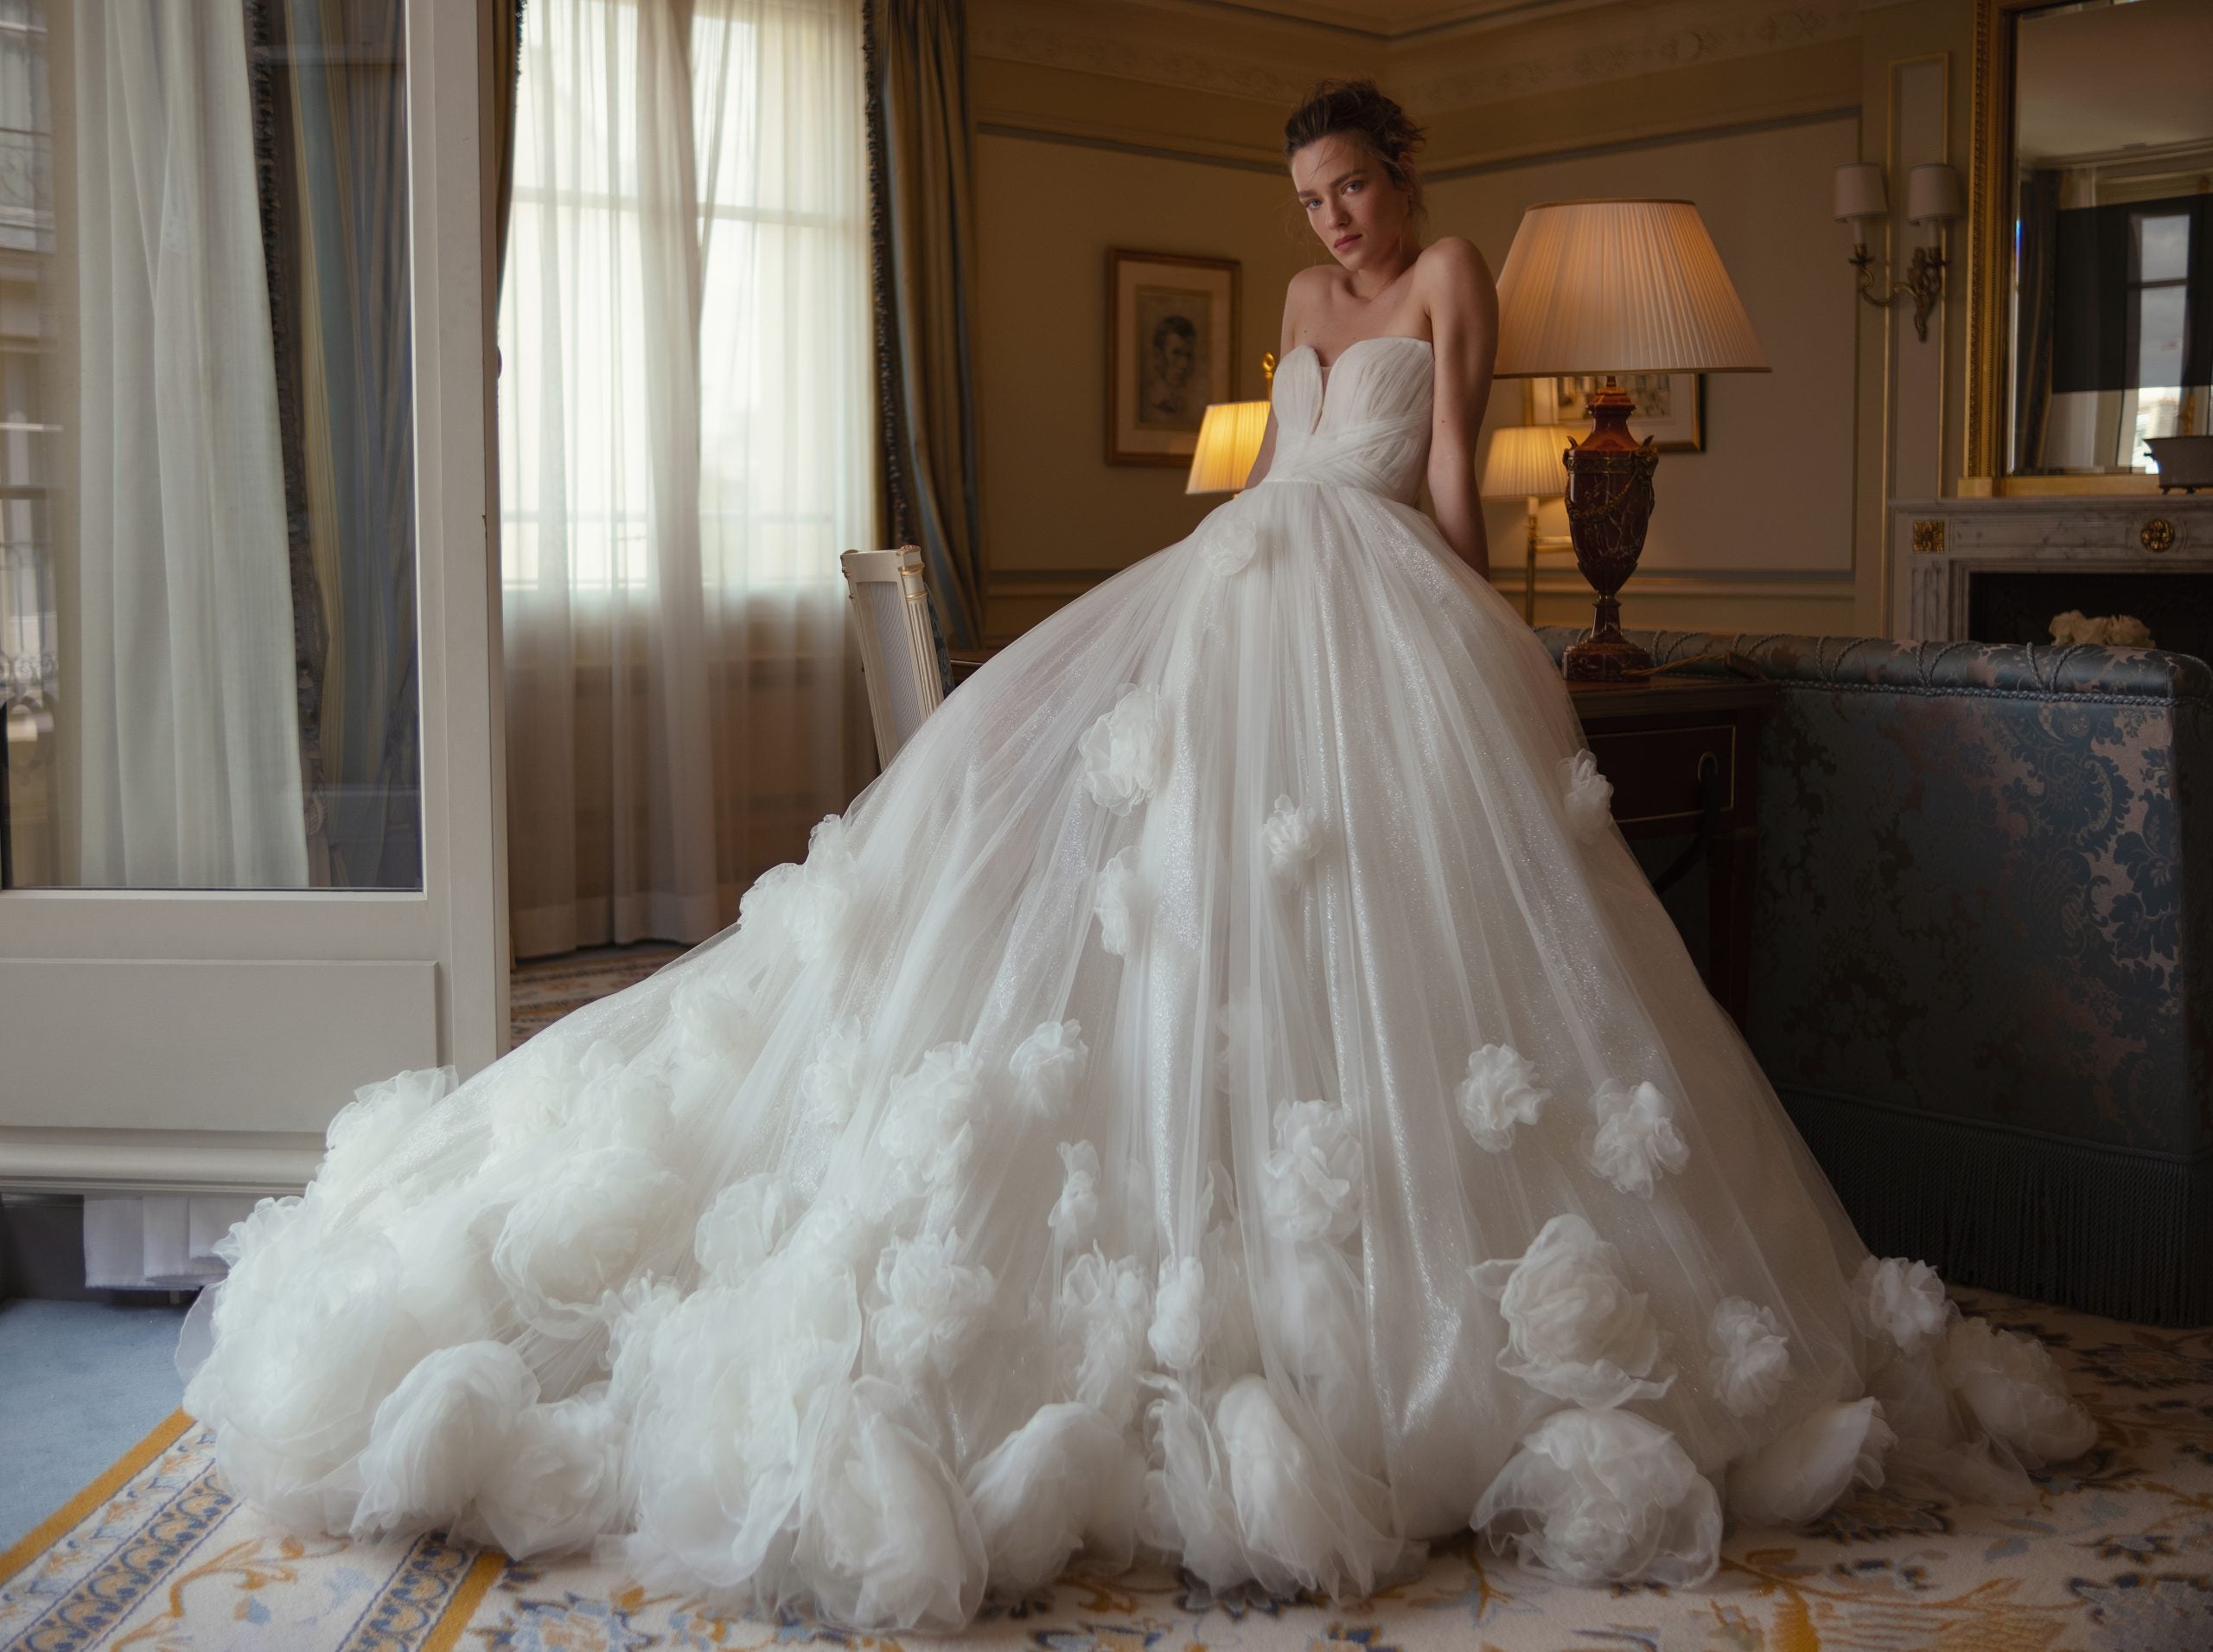 Strapless Ball Gown Wedding Dress With Textured Skirt by Nicole + Felicia - Image 1